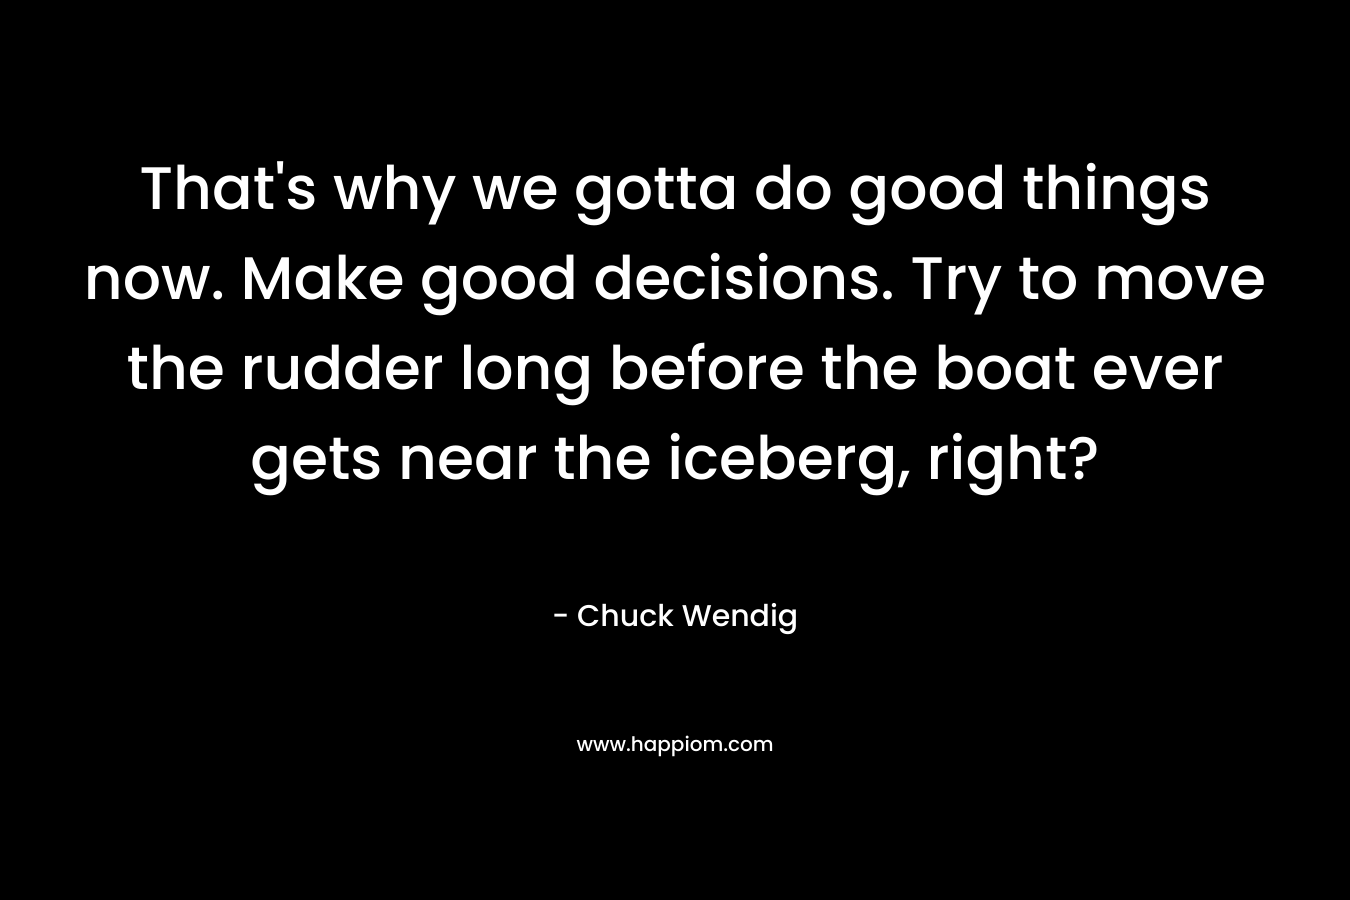 That’s why we gotta do good things now. Make good decisions. Try to move the rudder long before the boat ever gets near the iceberg, right? – Chuck Wendig